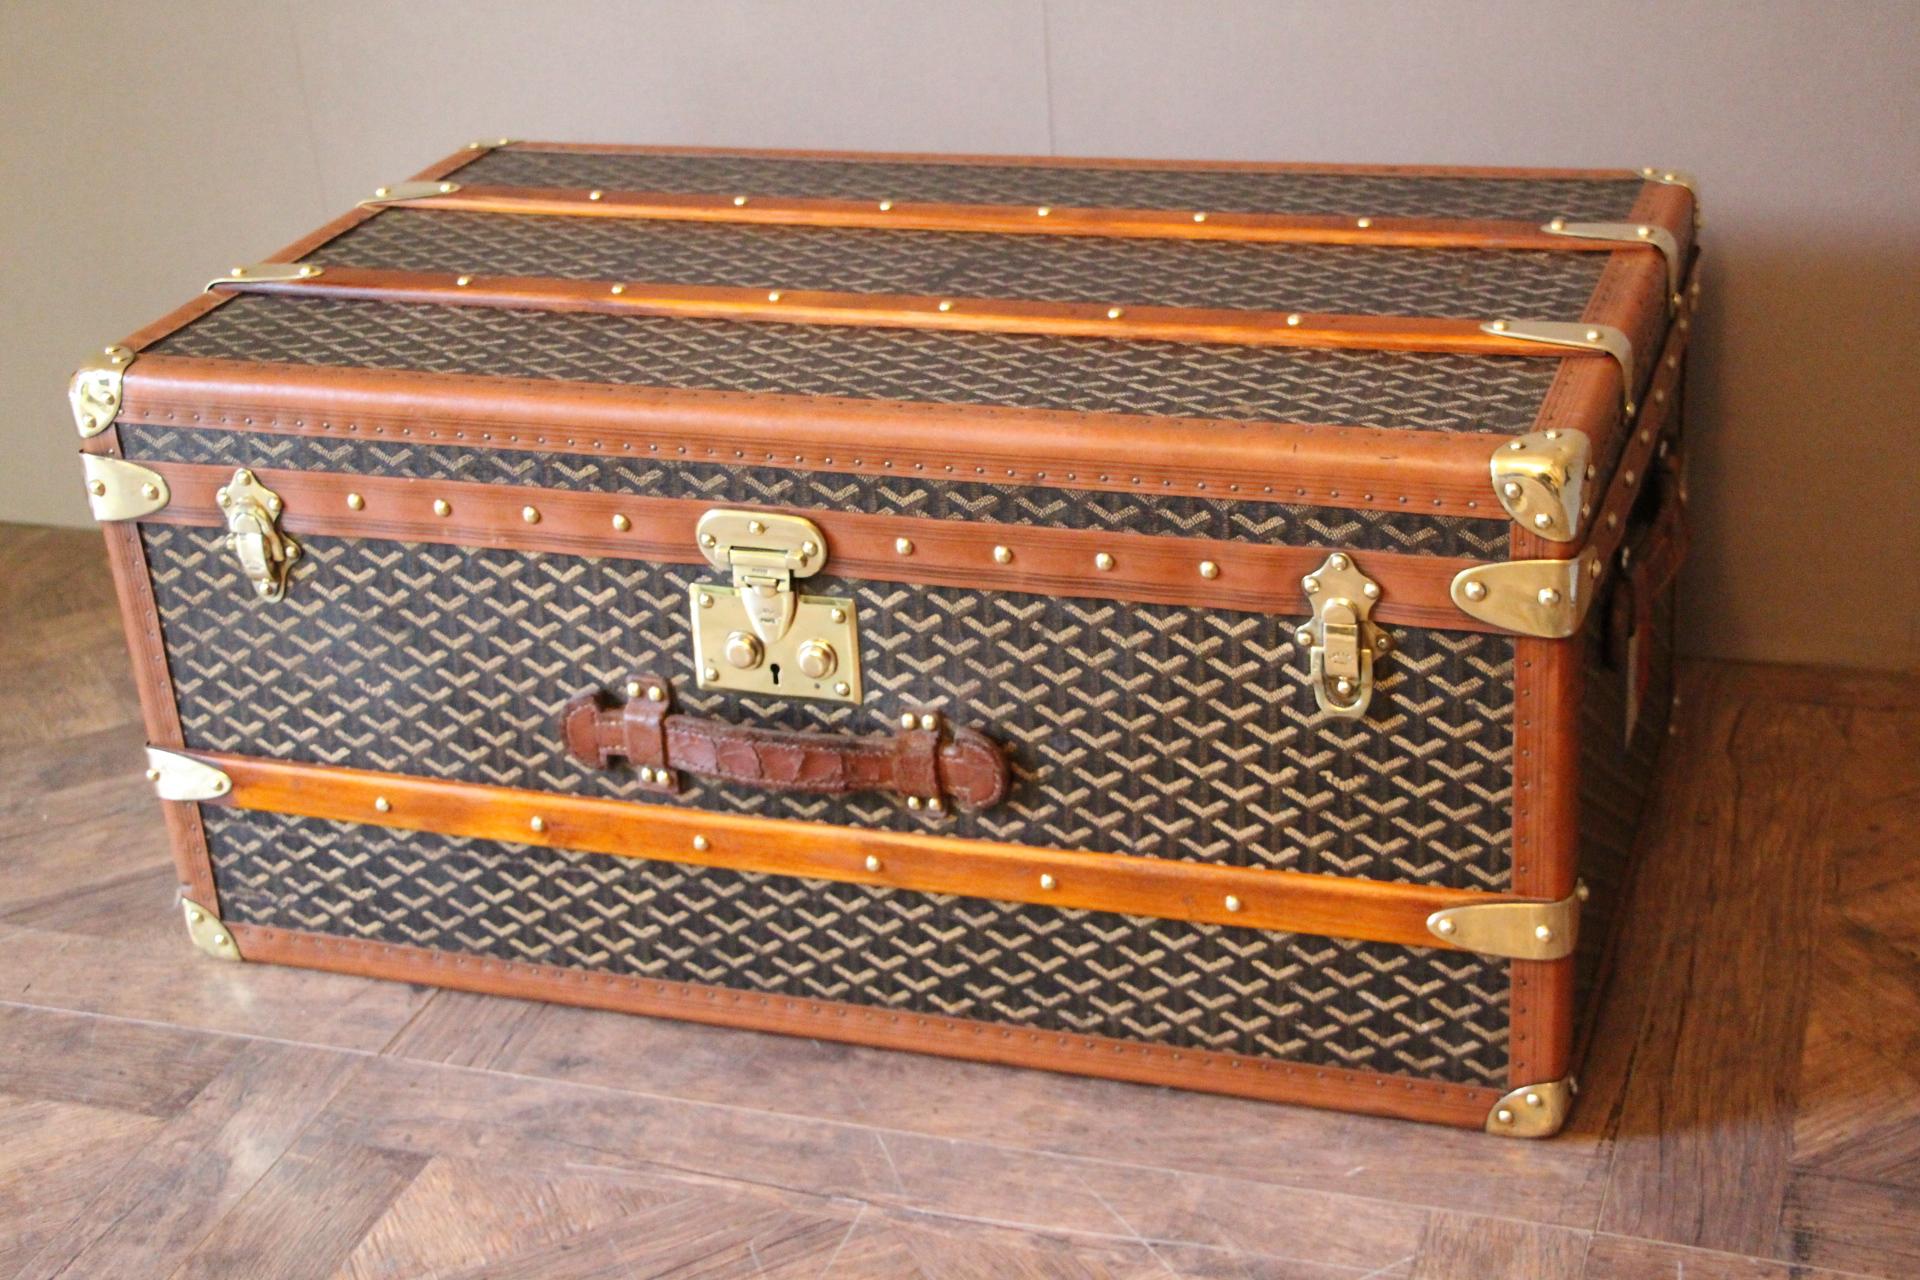 This beautiful small Goyard cabin trunk features the famous 